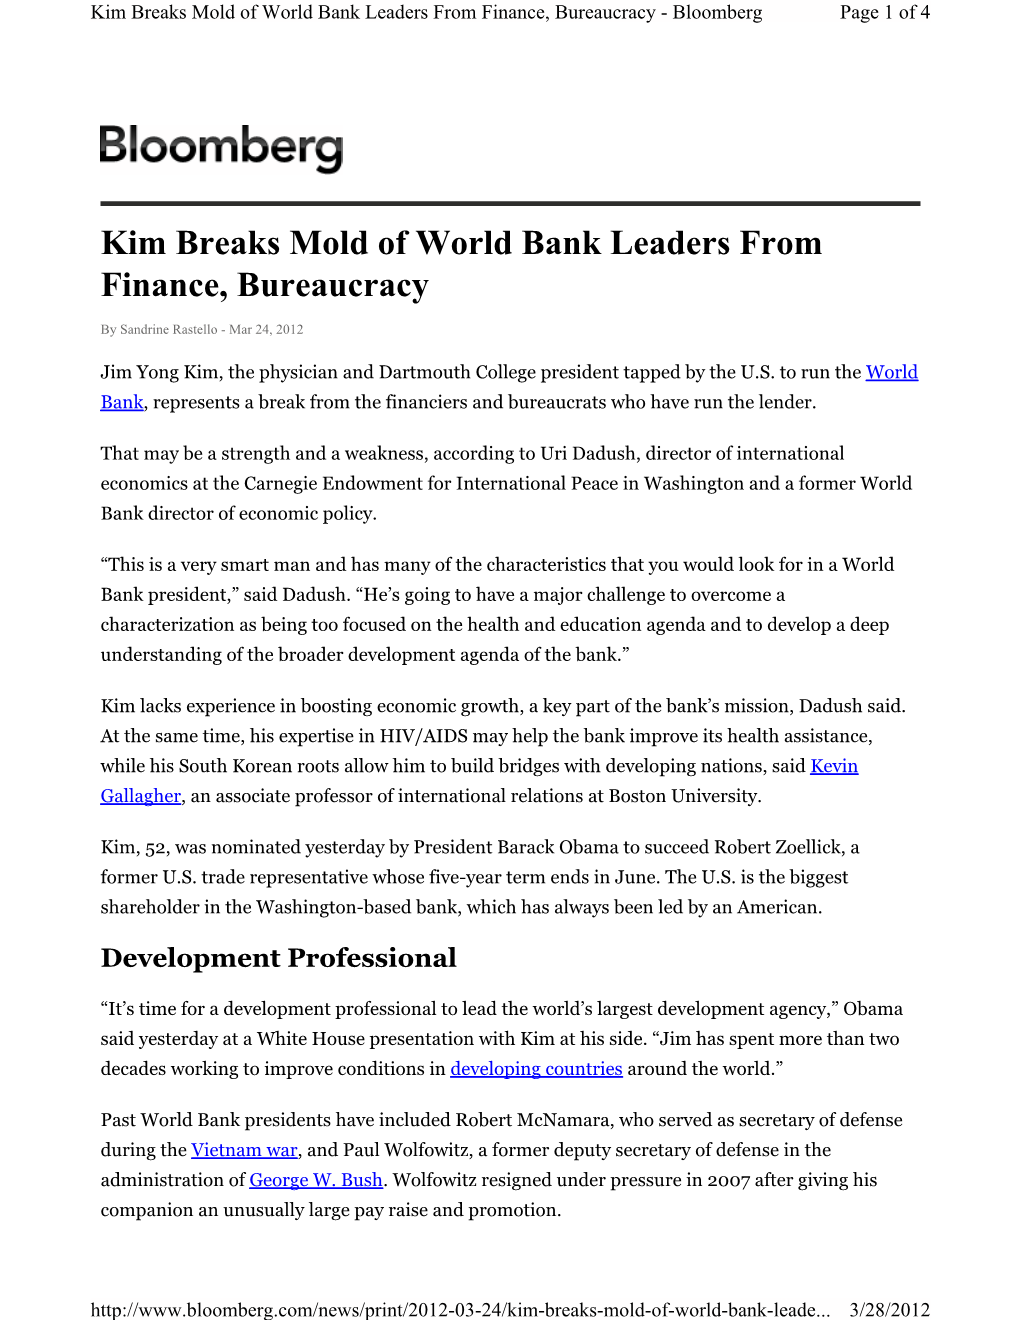 Kim Breaks Mold of World Bank Leaders from Finance, Bureaucracy - Bloomberg Page 1 of 4